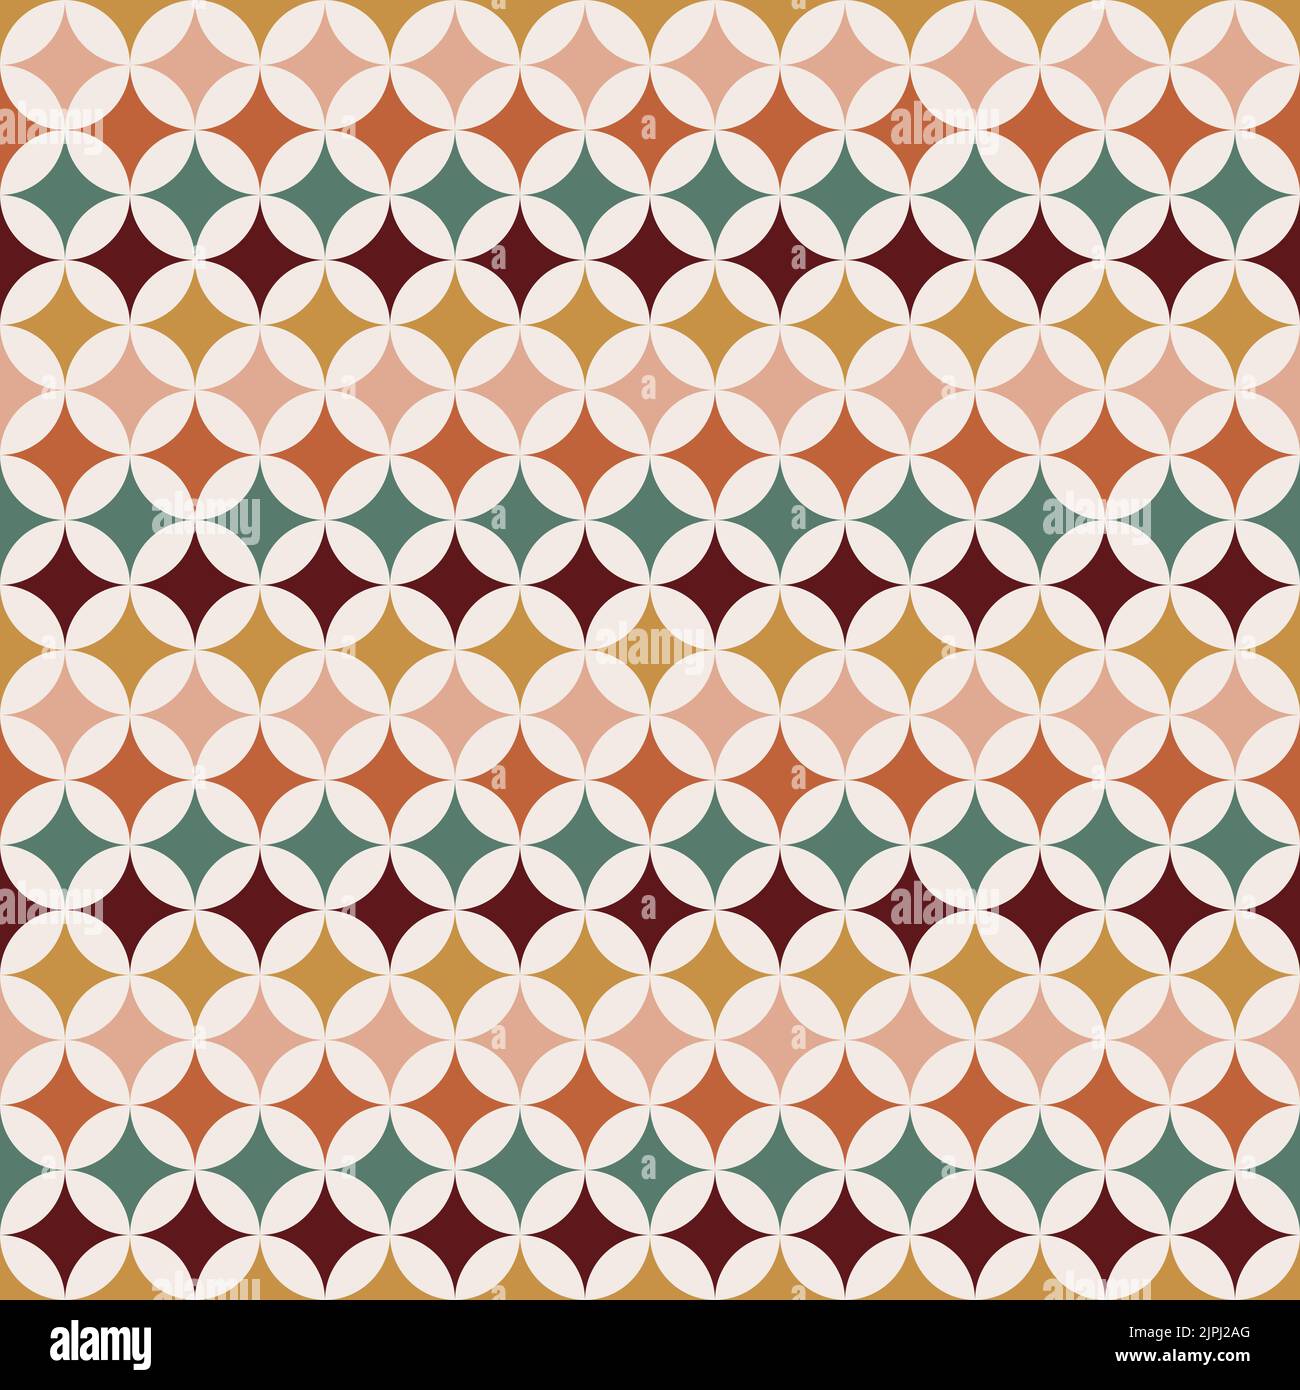 70 s seamless pattern. Retro colorful geometric square seamless background in seventies style. Groovy scrapbook paper. Yellow, orange, brown, green vi Stock Vector